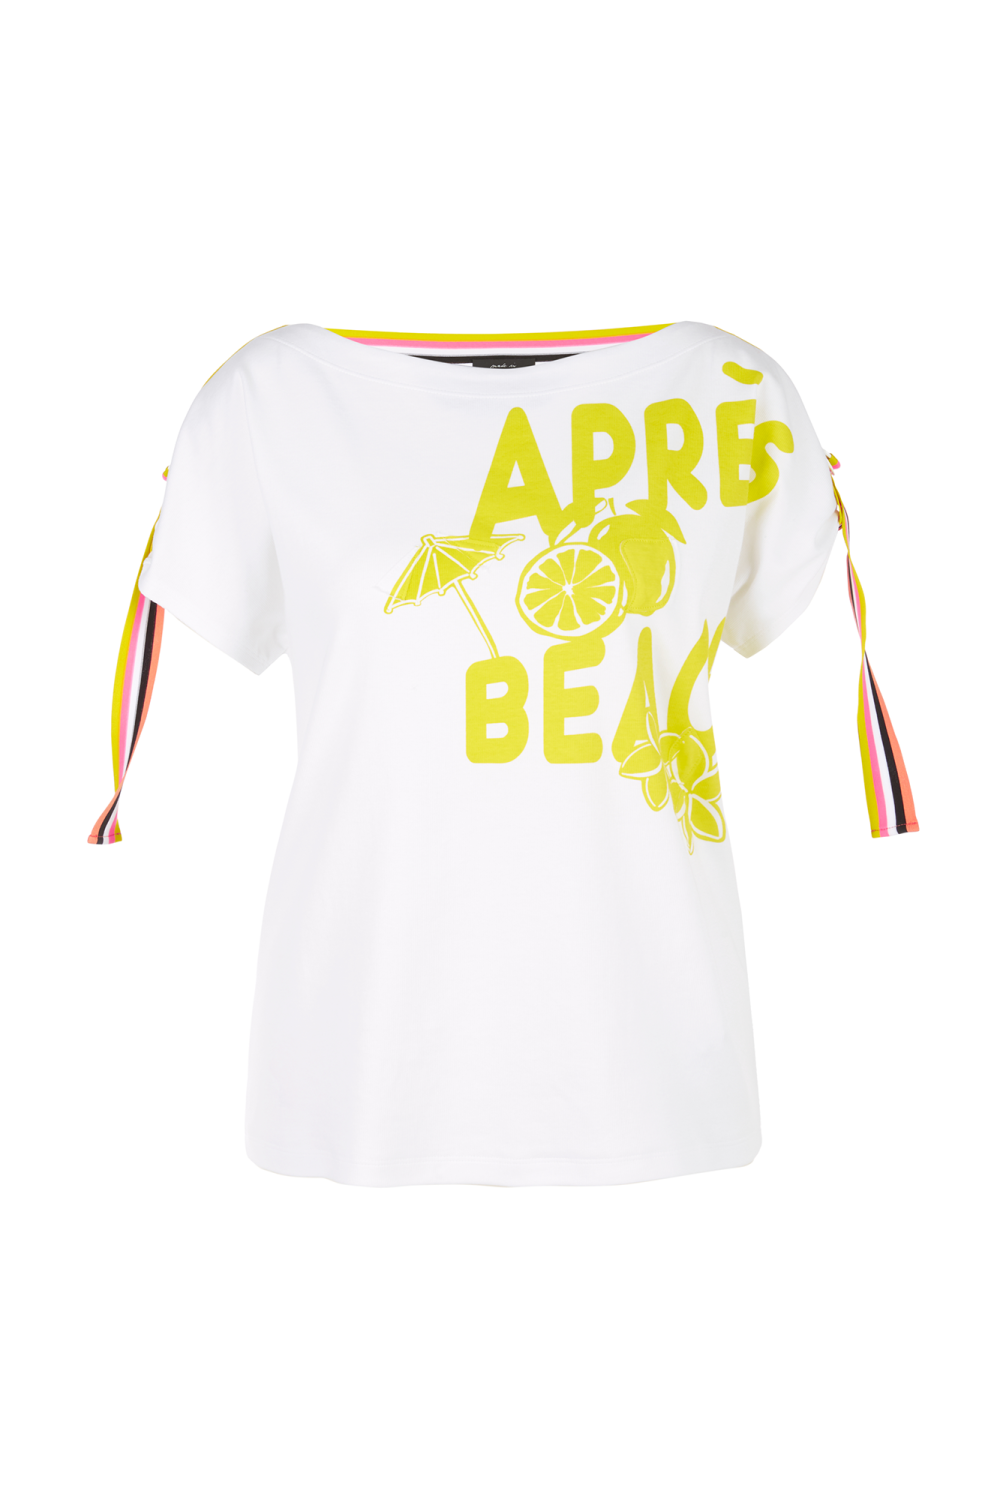 This Apres Beach T-shirt is crafted from a blend of cotton and elastane for superior comfort and flexibility.